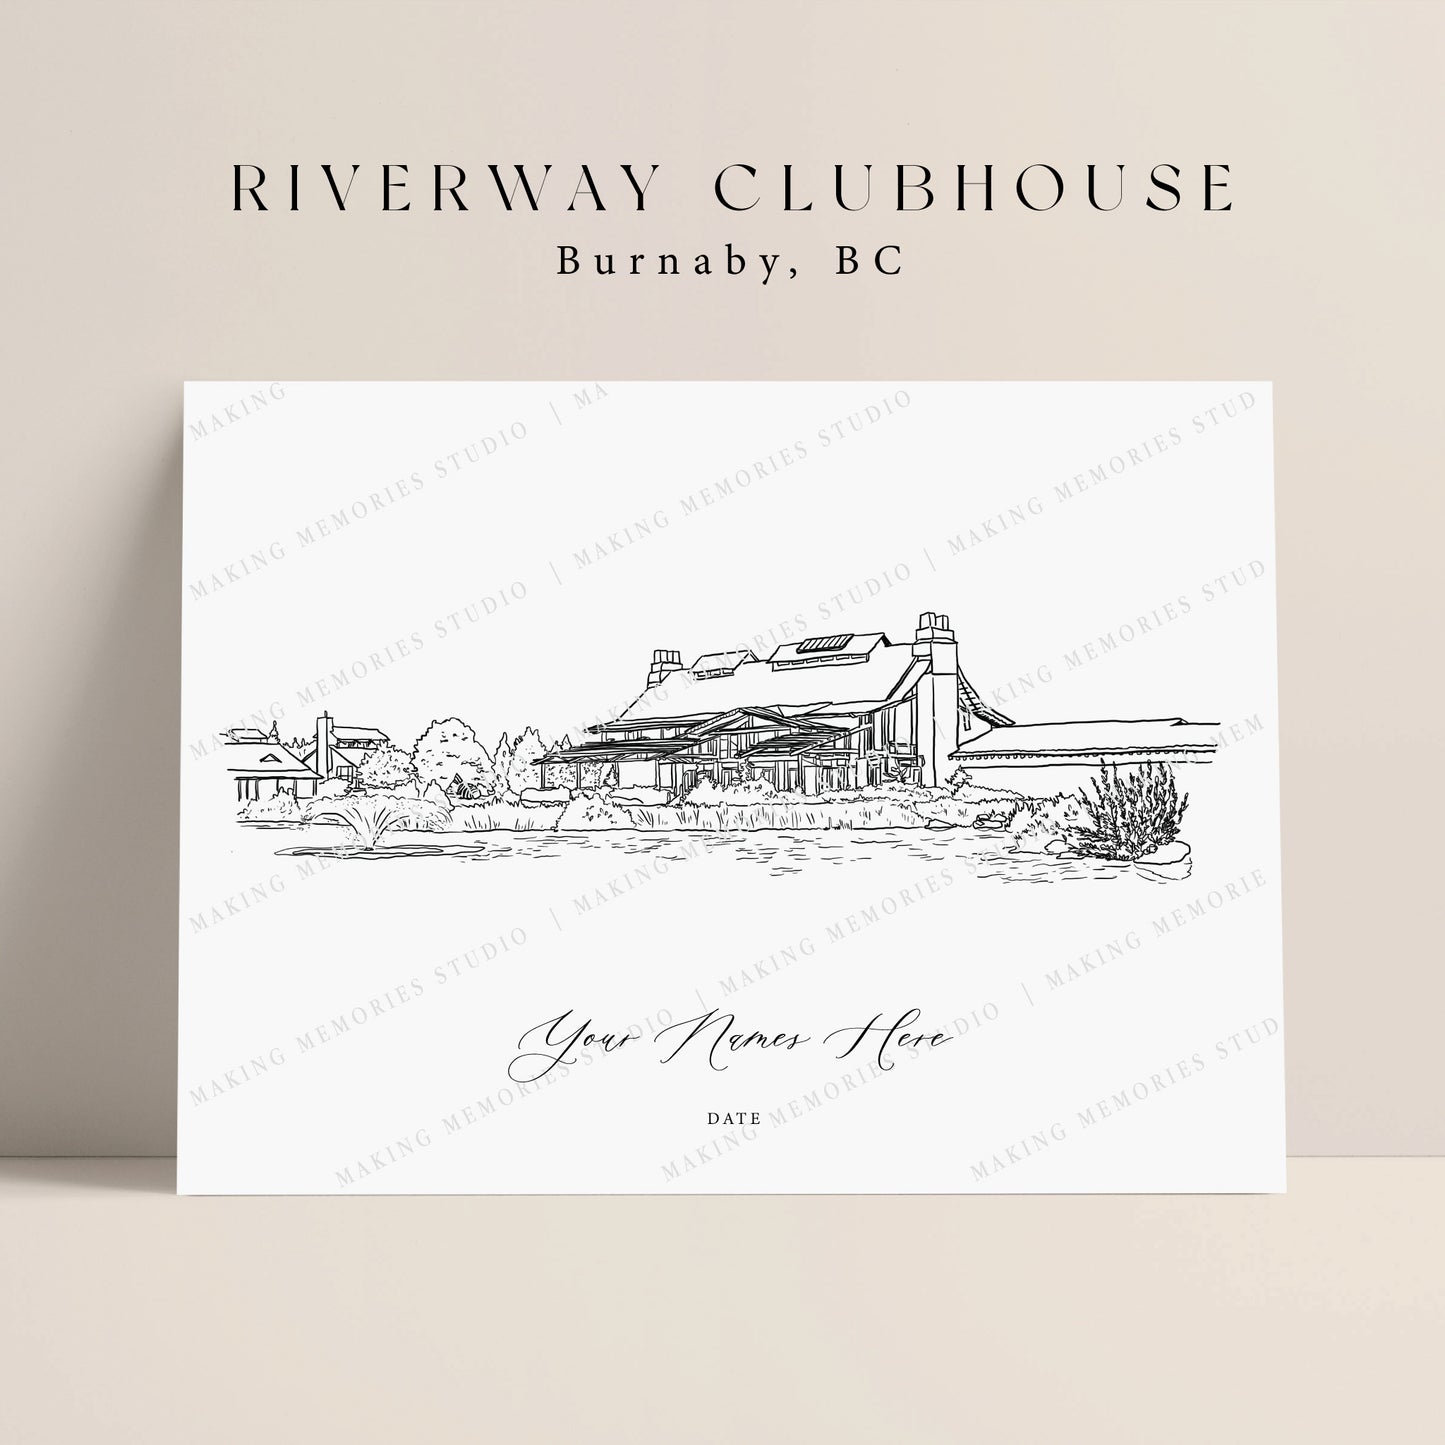 Riverway Clubhouse